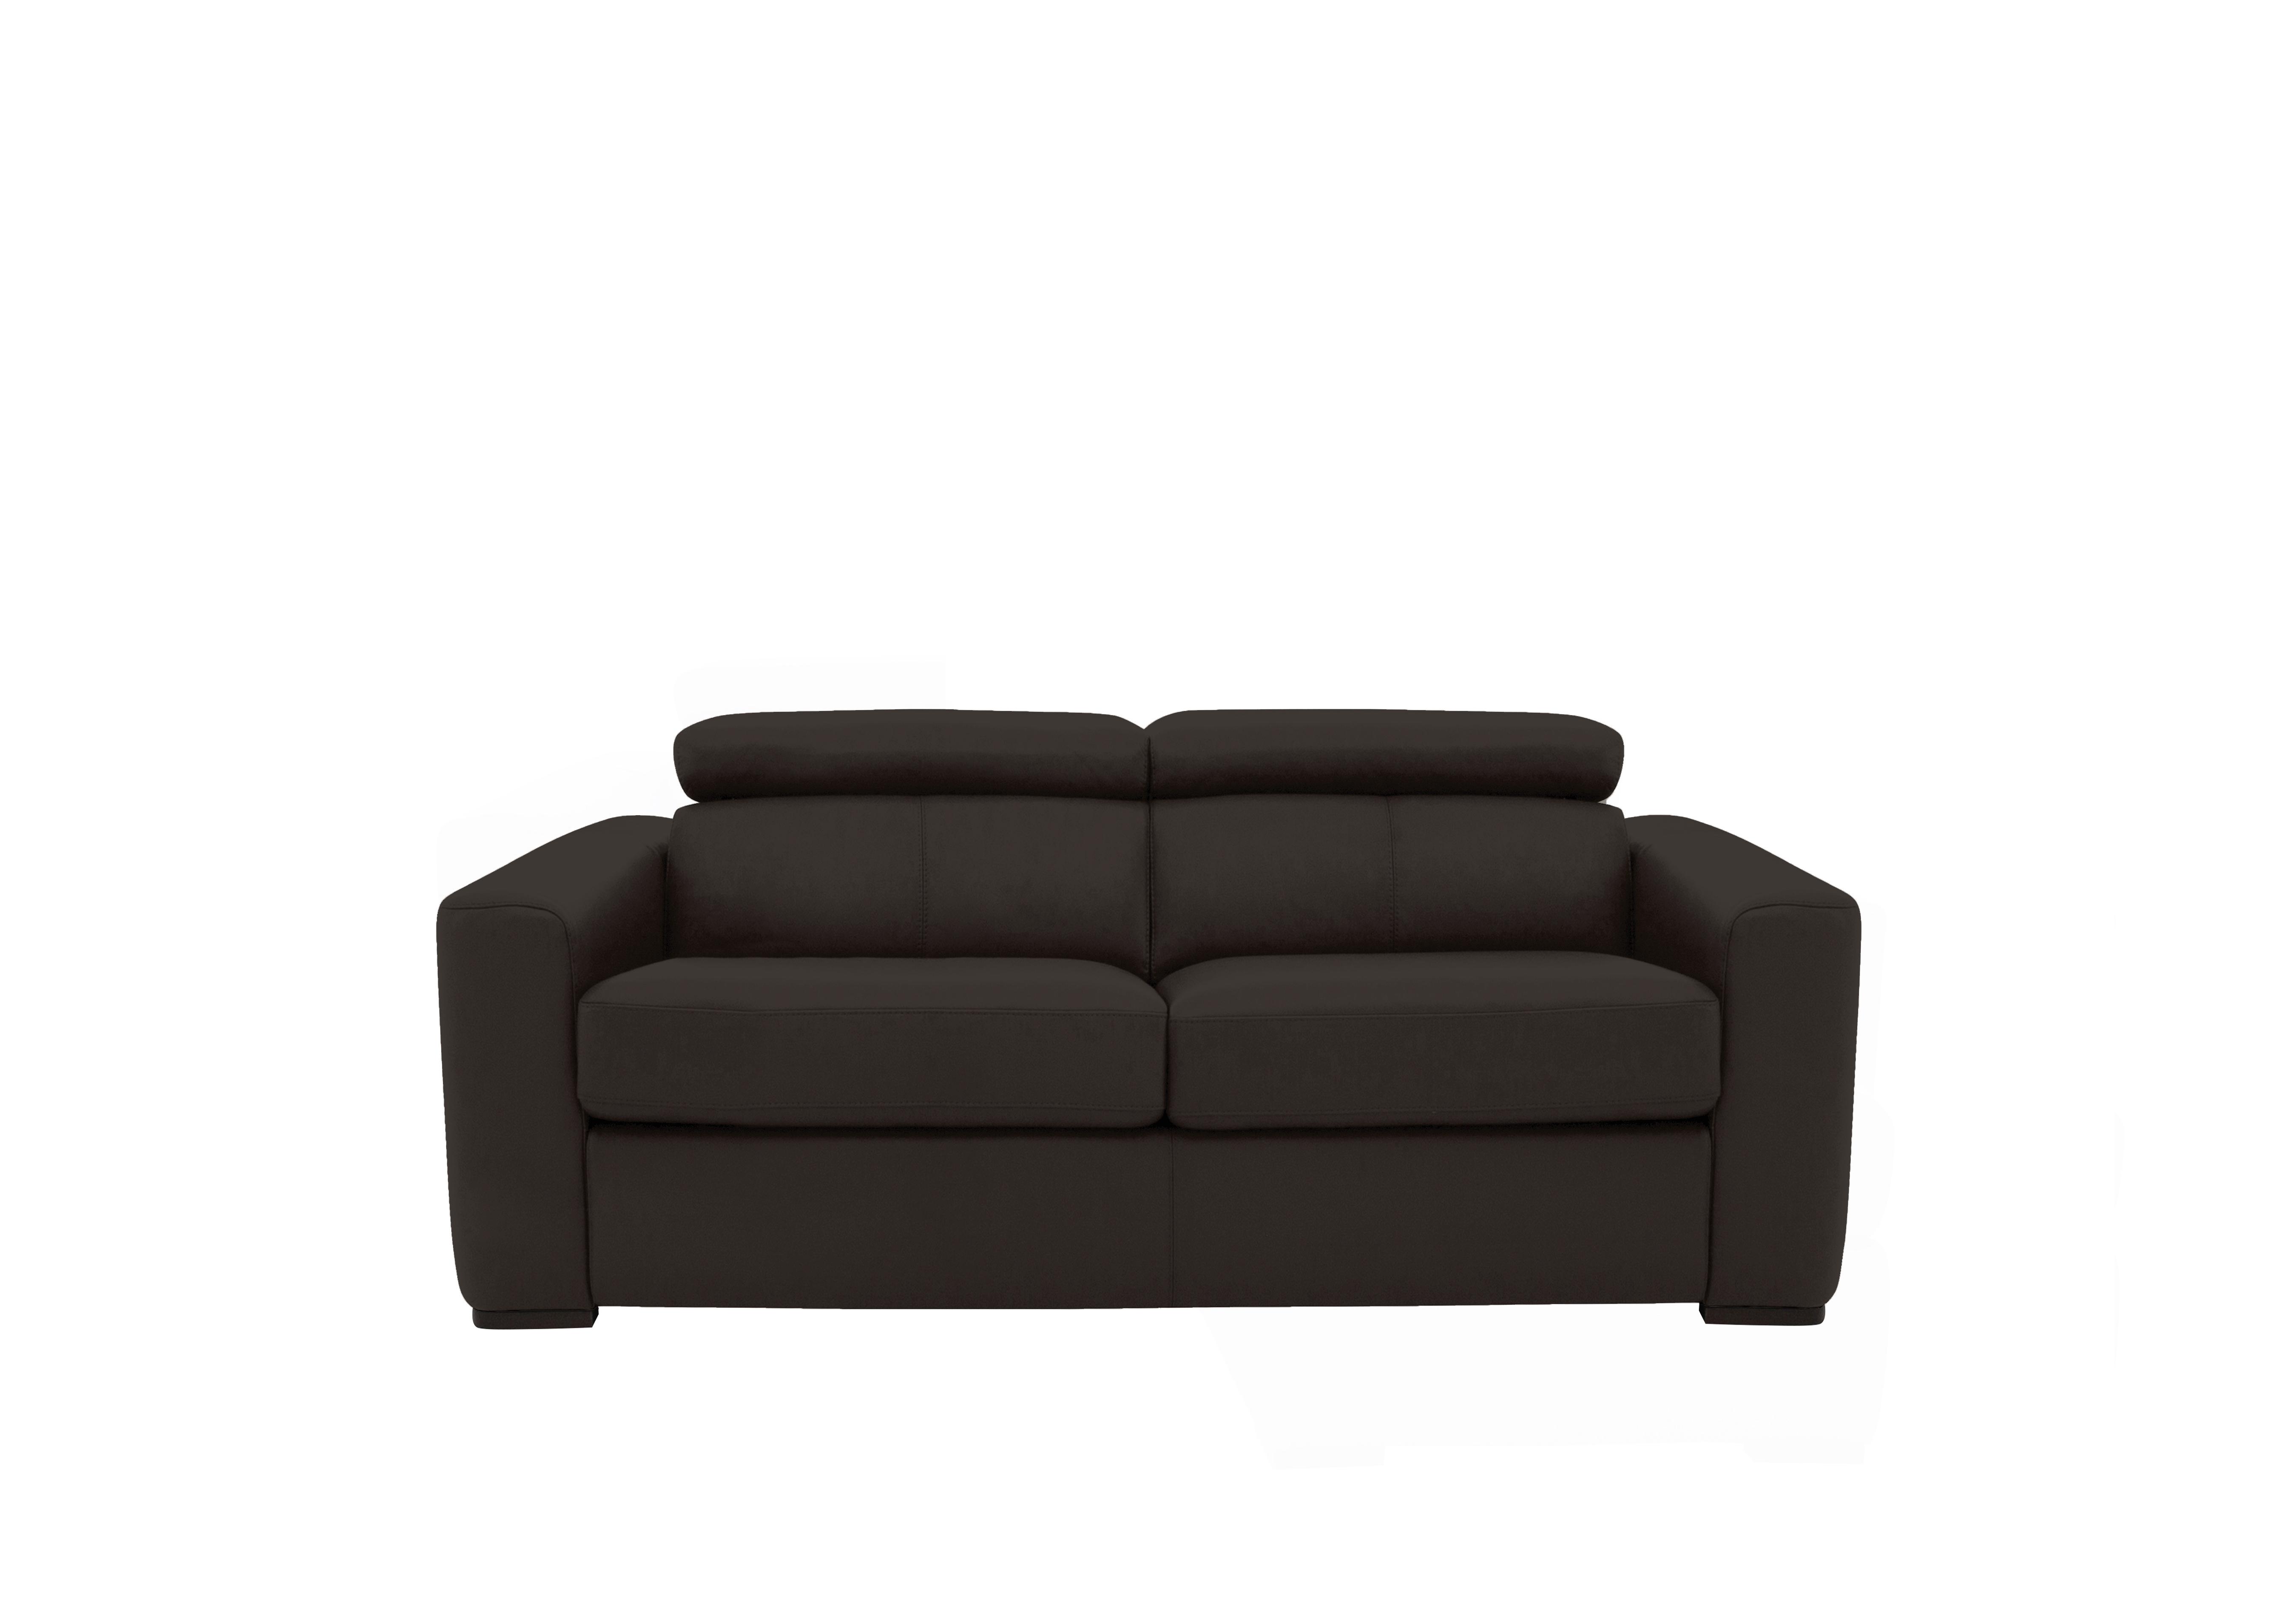 Infinity 2 Seater Leather Sofa in Bv-1748 Dark Chocolate on Furniture Village